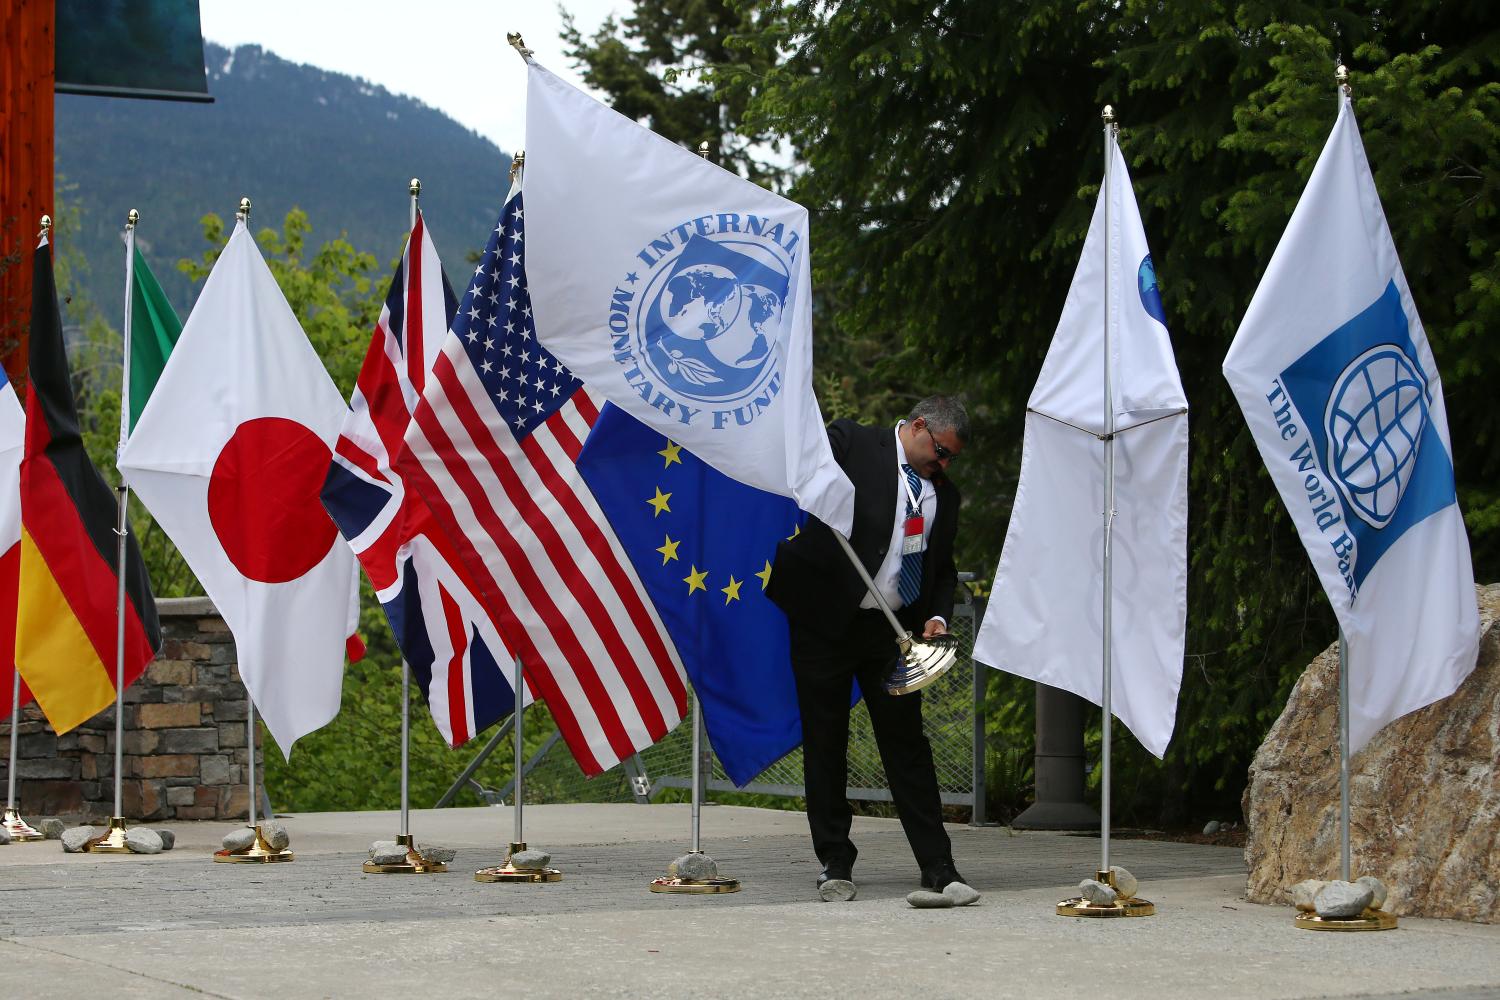 A security official picks up a flag after wind blew it over during the G7 Finance Ministers summit in Whistler, British Columbia, Canada, May 31, 2018.  REUTERS/Ben Nelms - RC1C003FD610